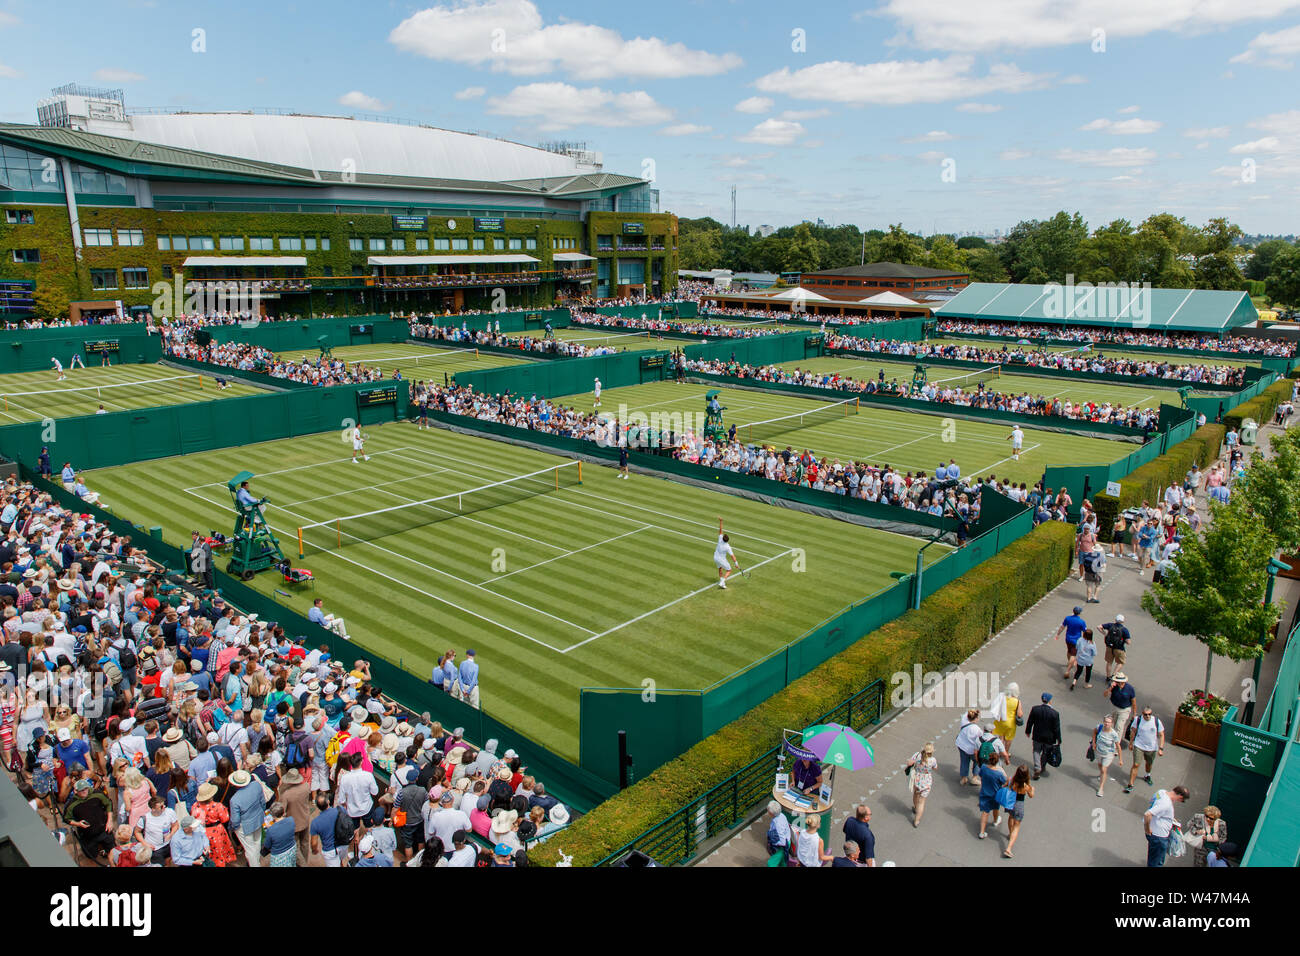 General View of Centre Court and The Wimbledon Championships 2019. Held at The All England Lawn Tennis Club, Wimbledon. Stock Photo